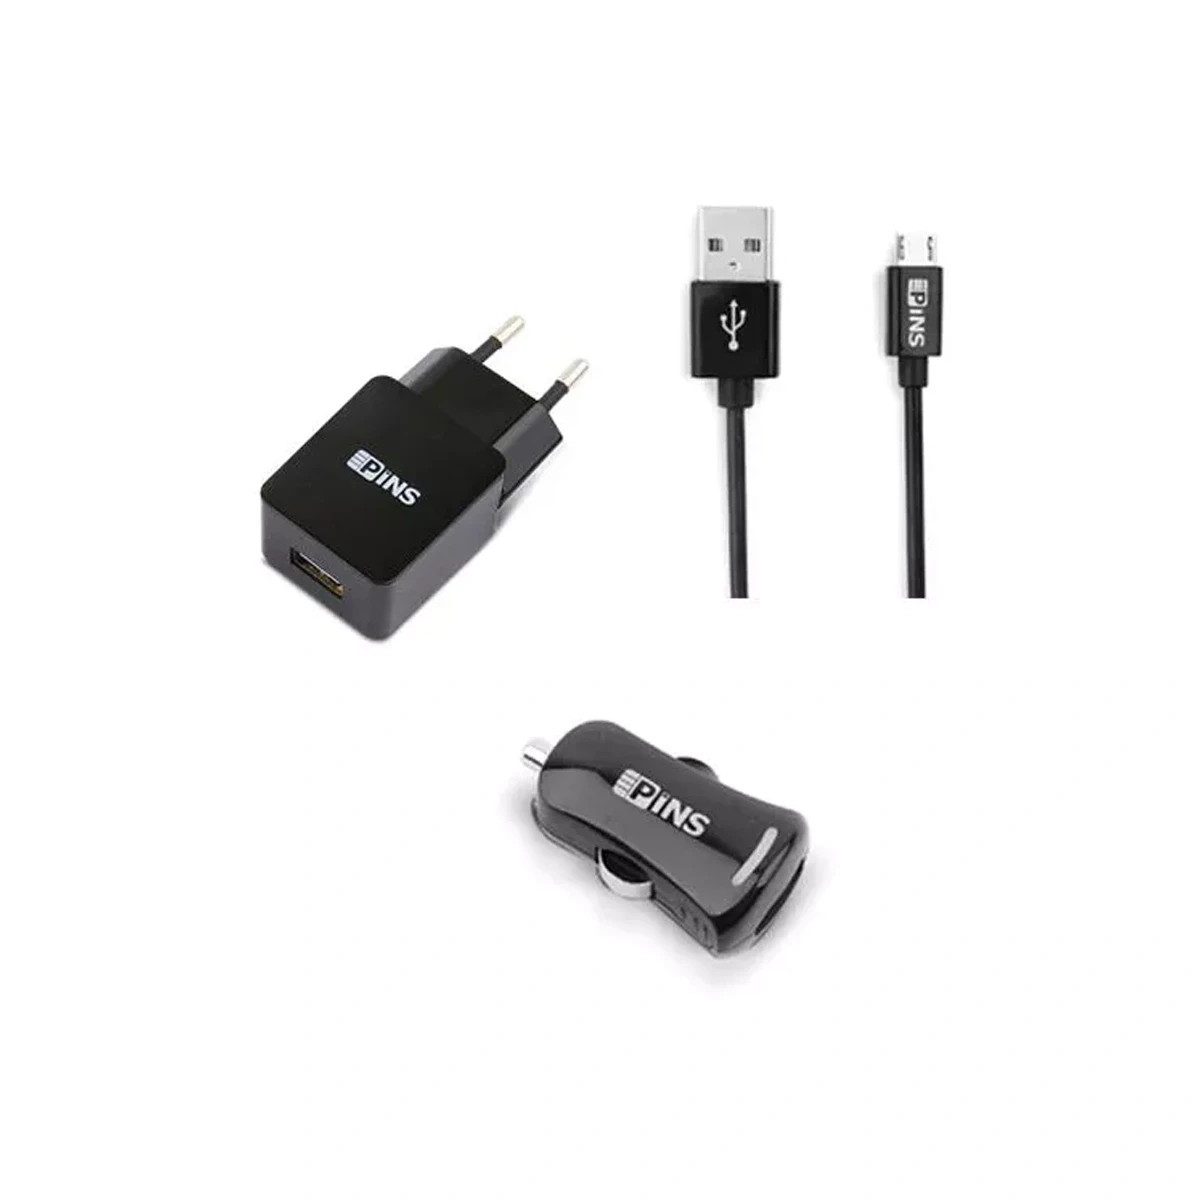 Pins Charger 3*1 Micro USB 2.1A